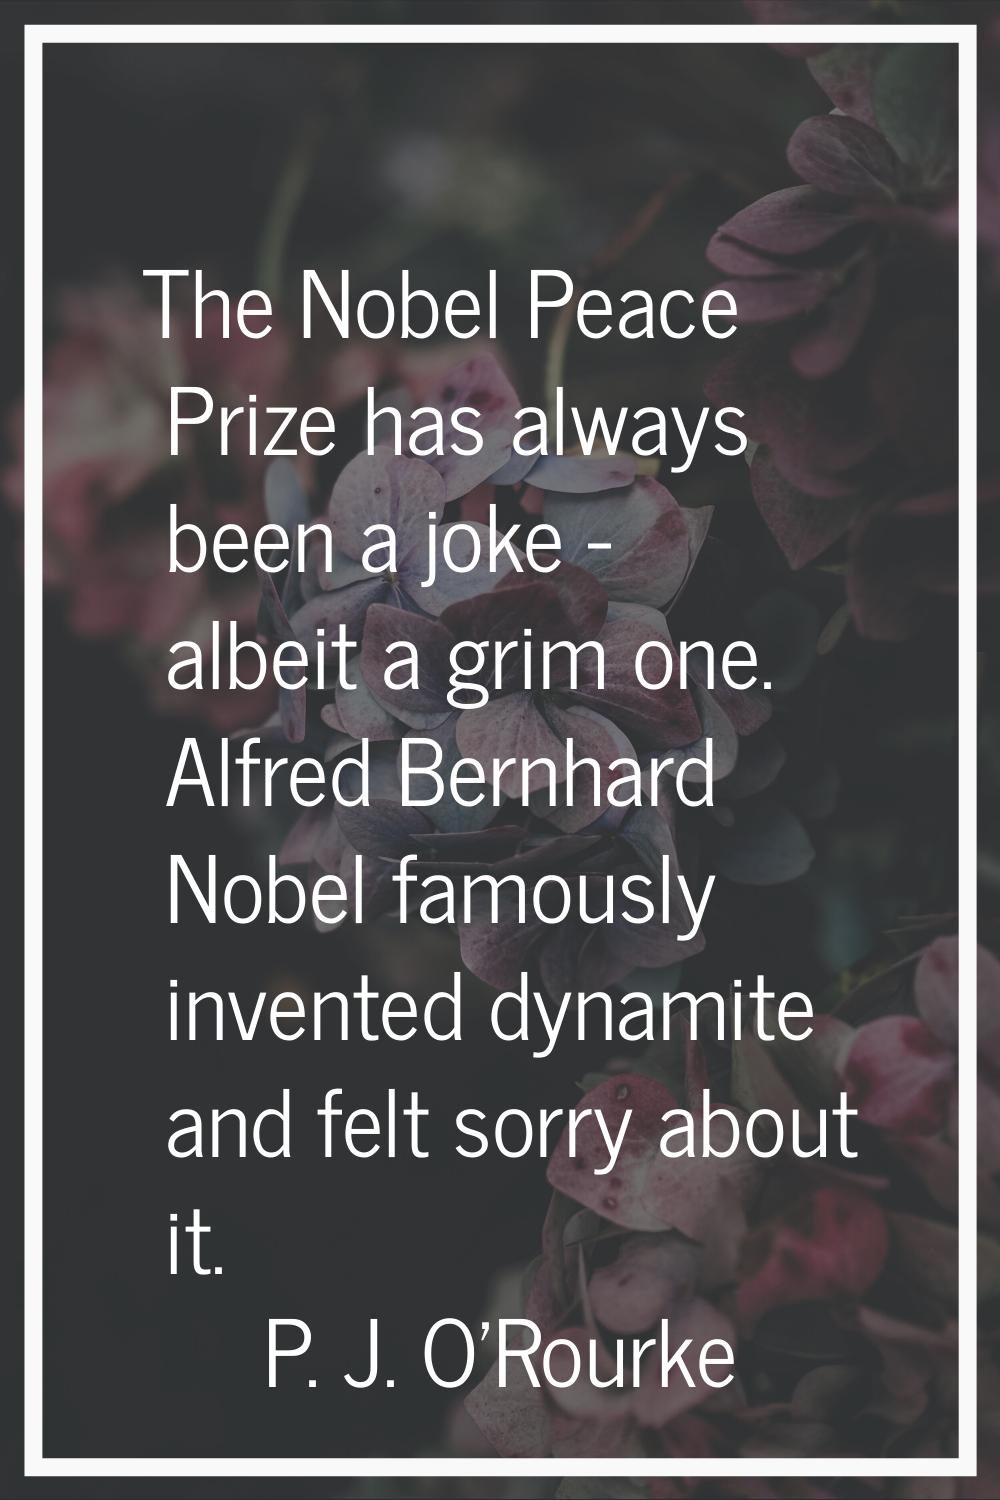 The Nobel Peace Prize has always been a joke - albeit a grim one. Alfred Bernhard Nobel famously in